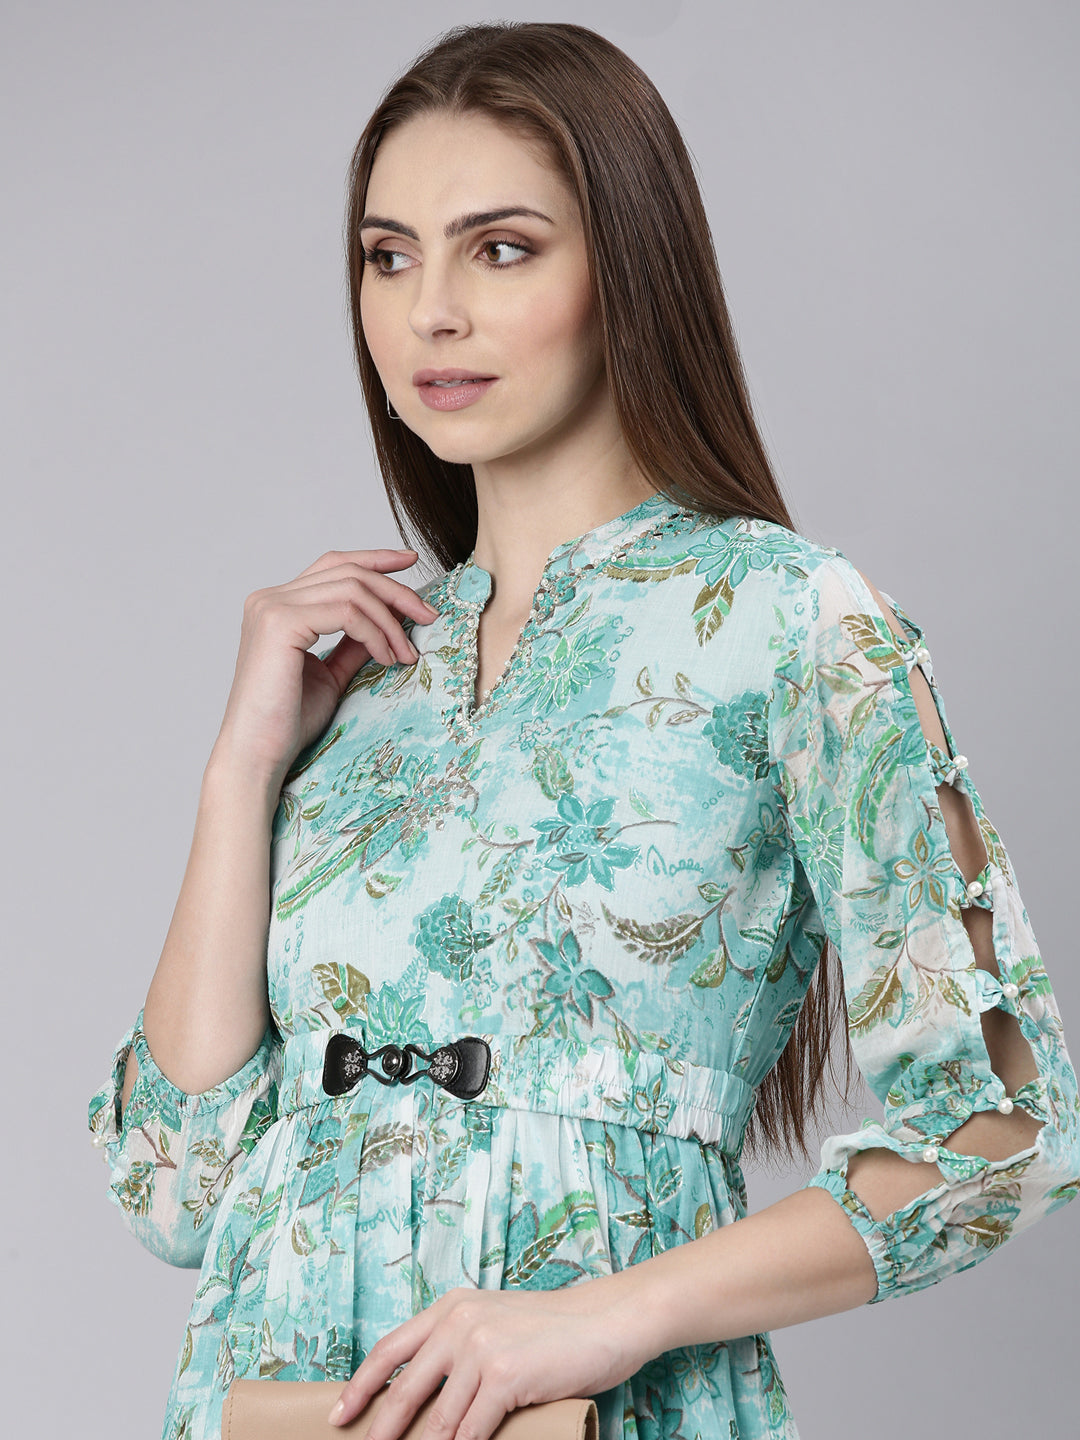 Women Turquoise Blue Floral Fit and Flare Dress